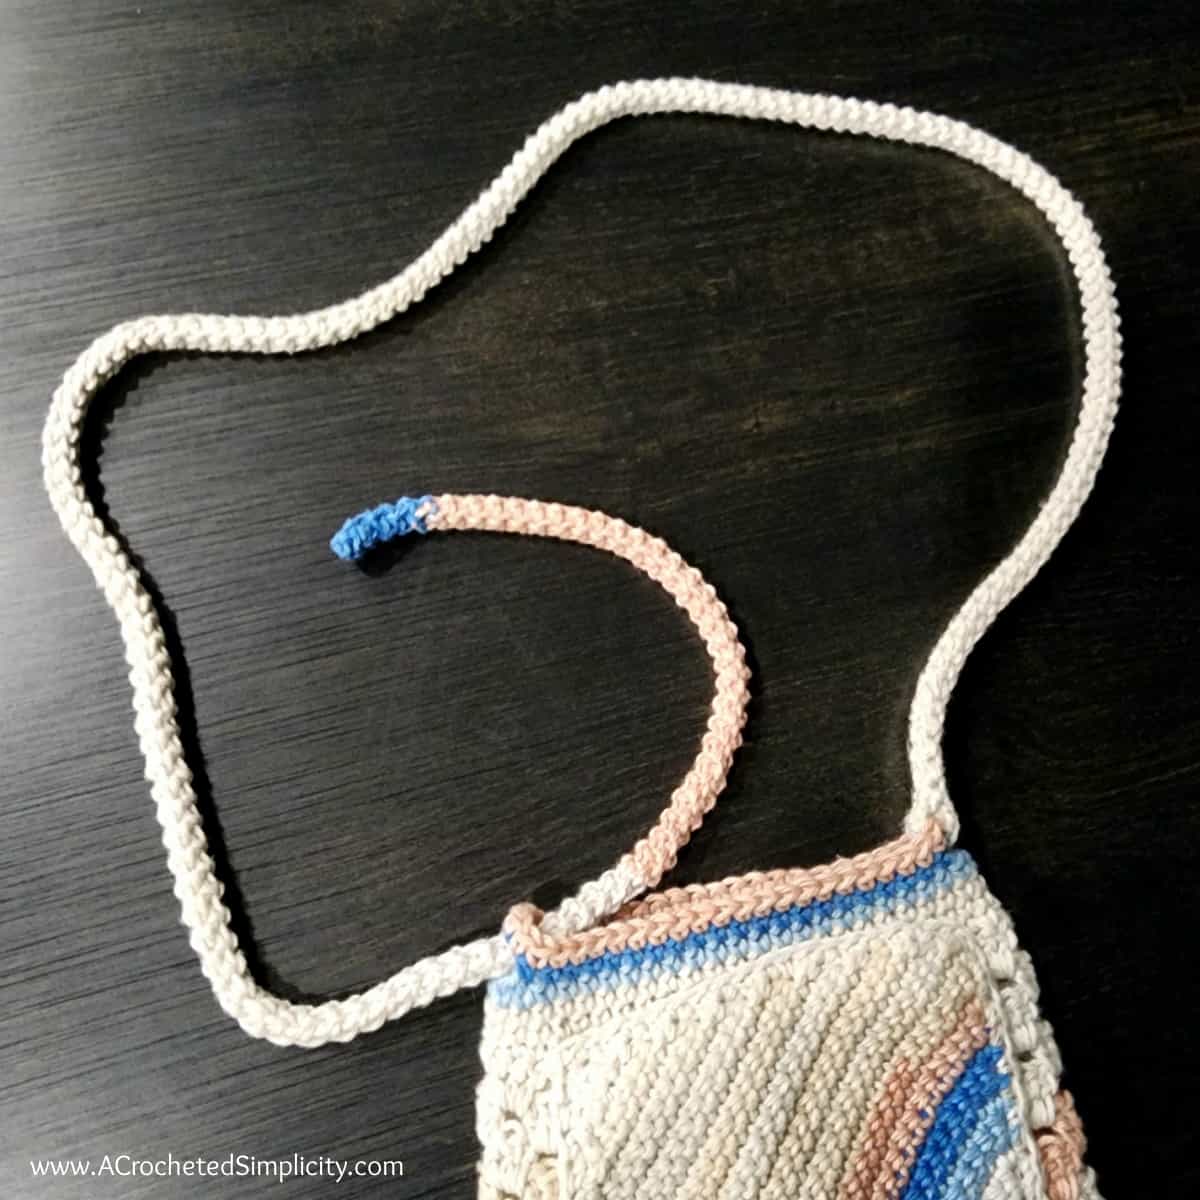 Photo tutorial showing how to assemble the water bottle sling strap.